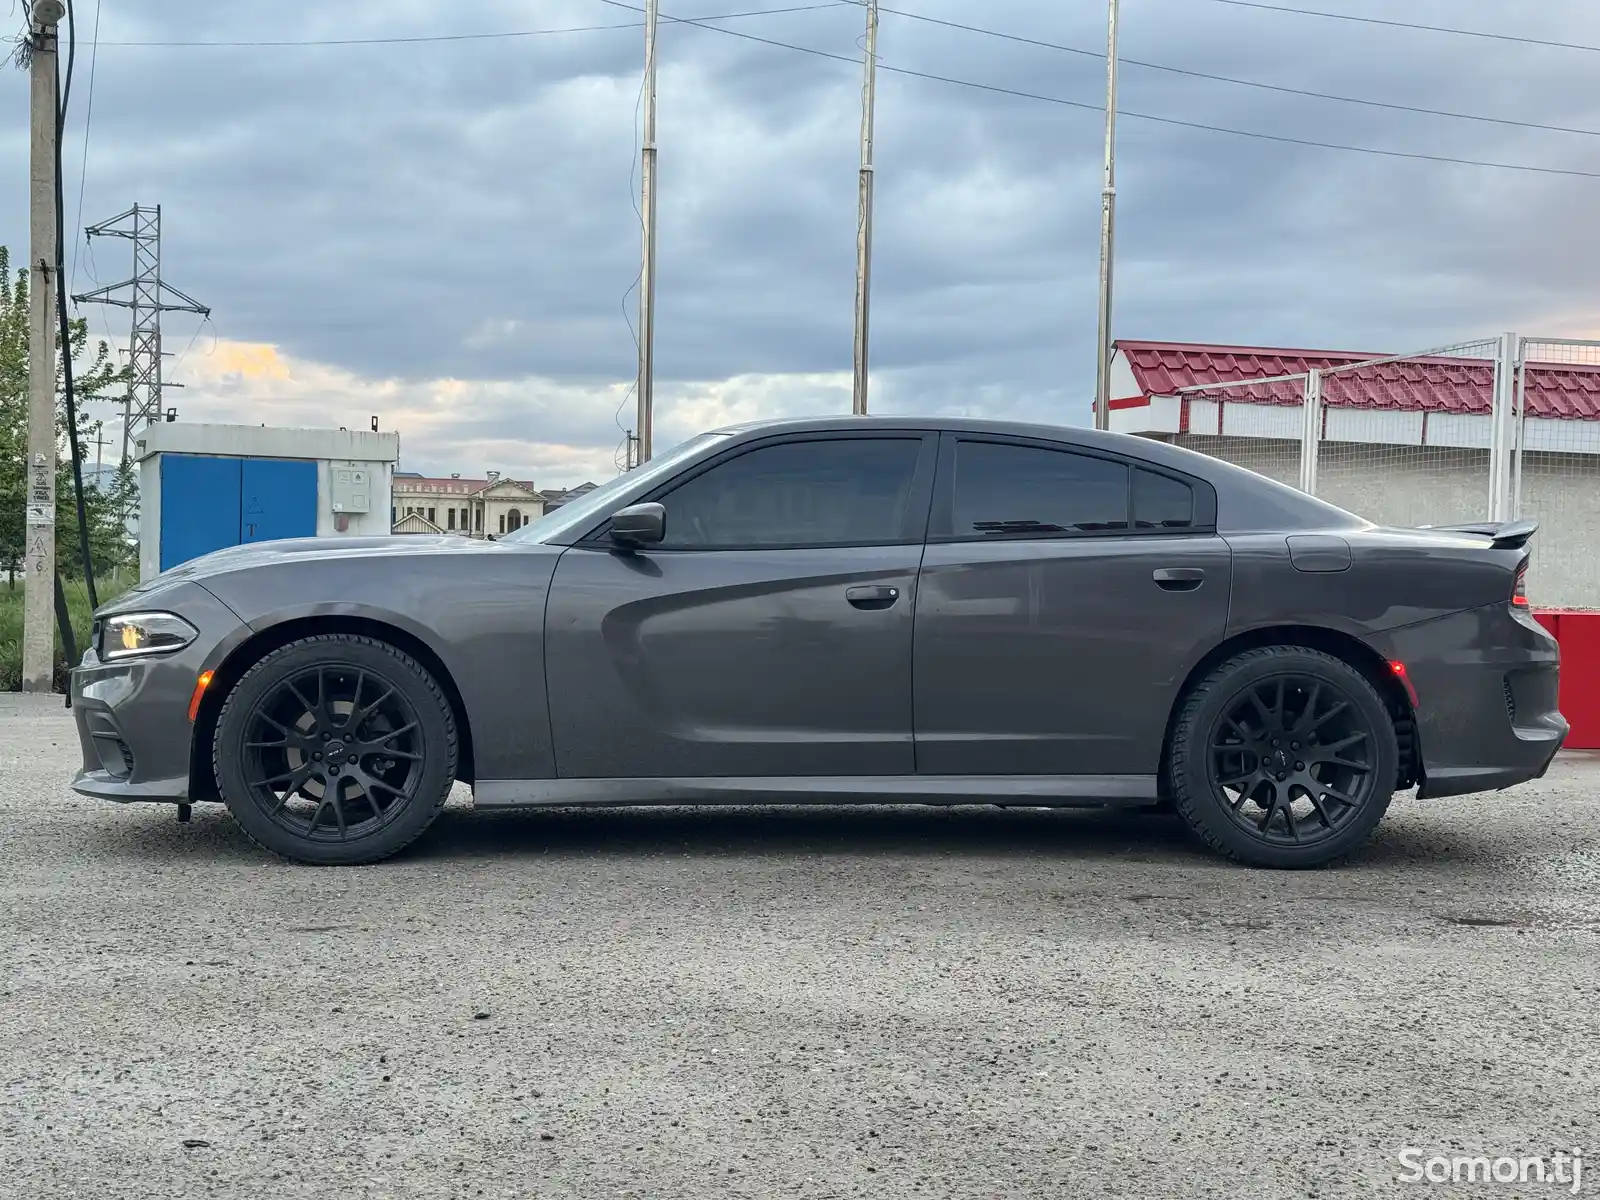 Dodge Charger, 2018-6